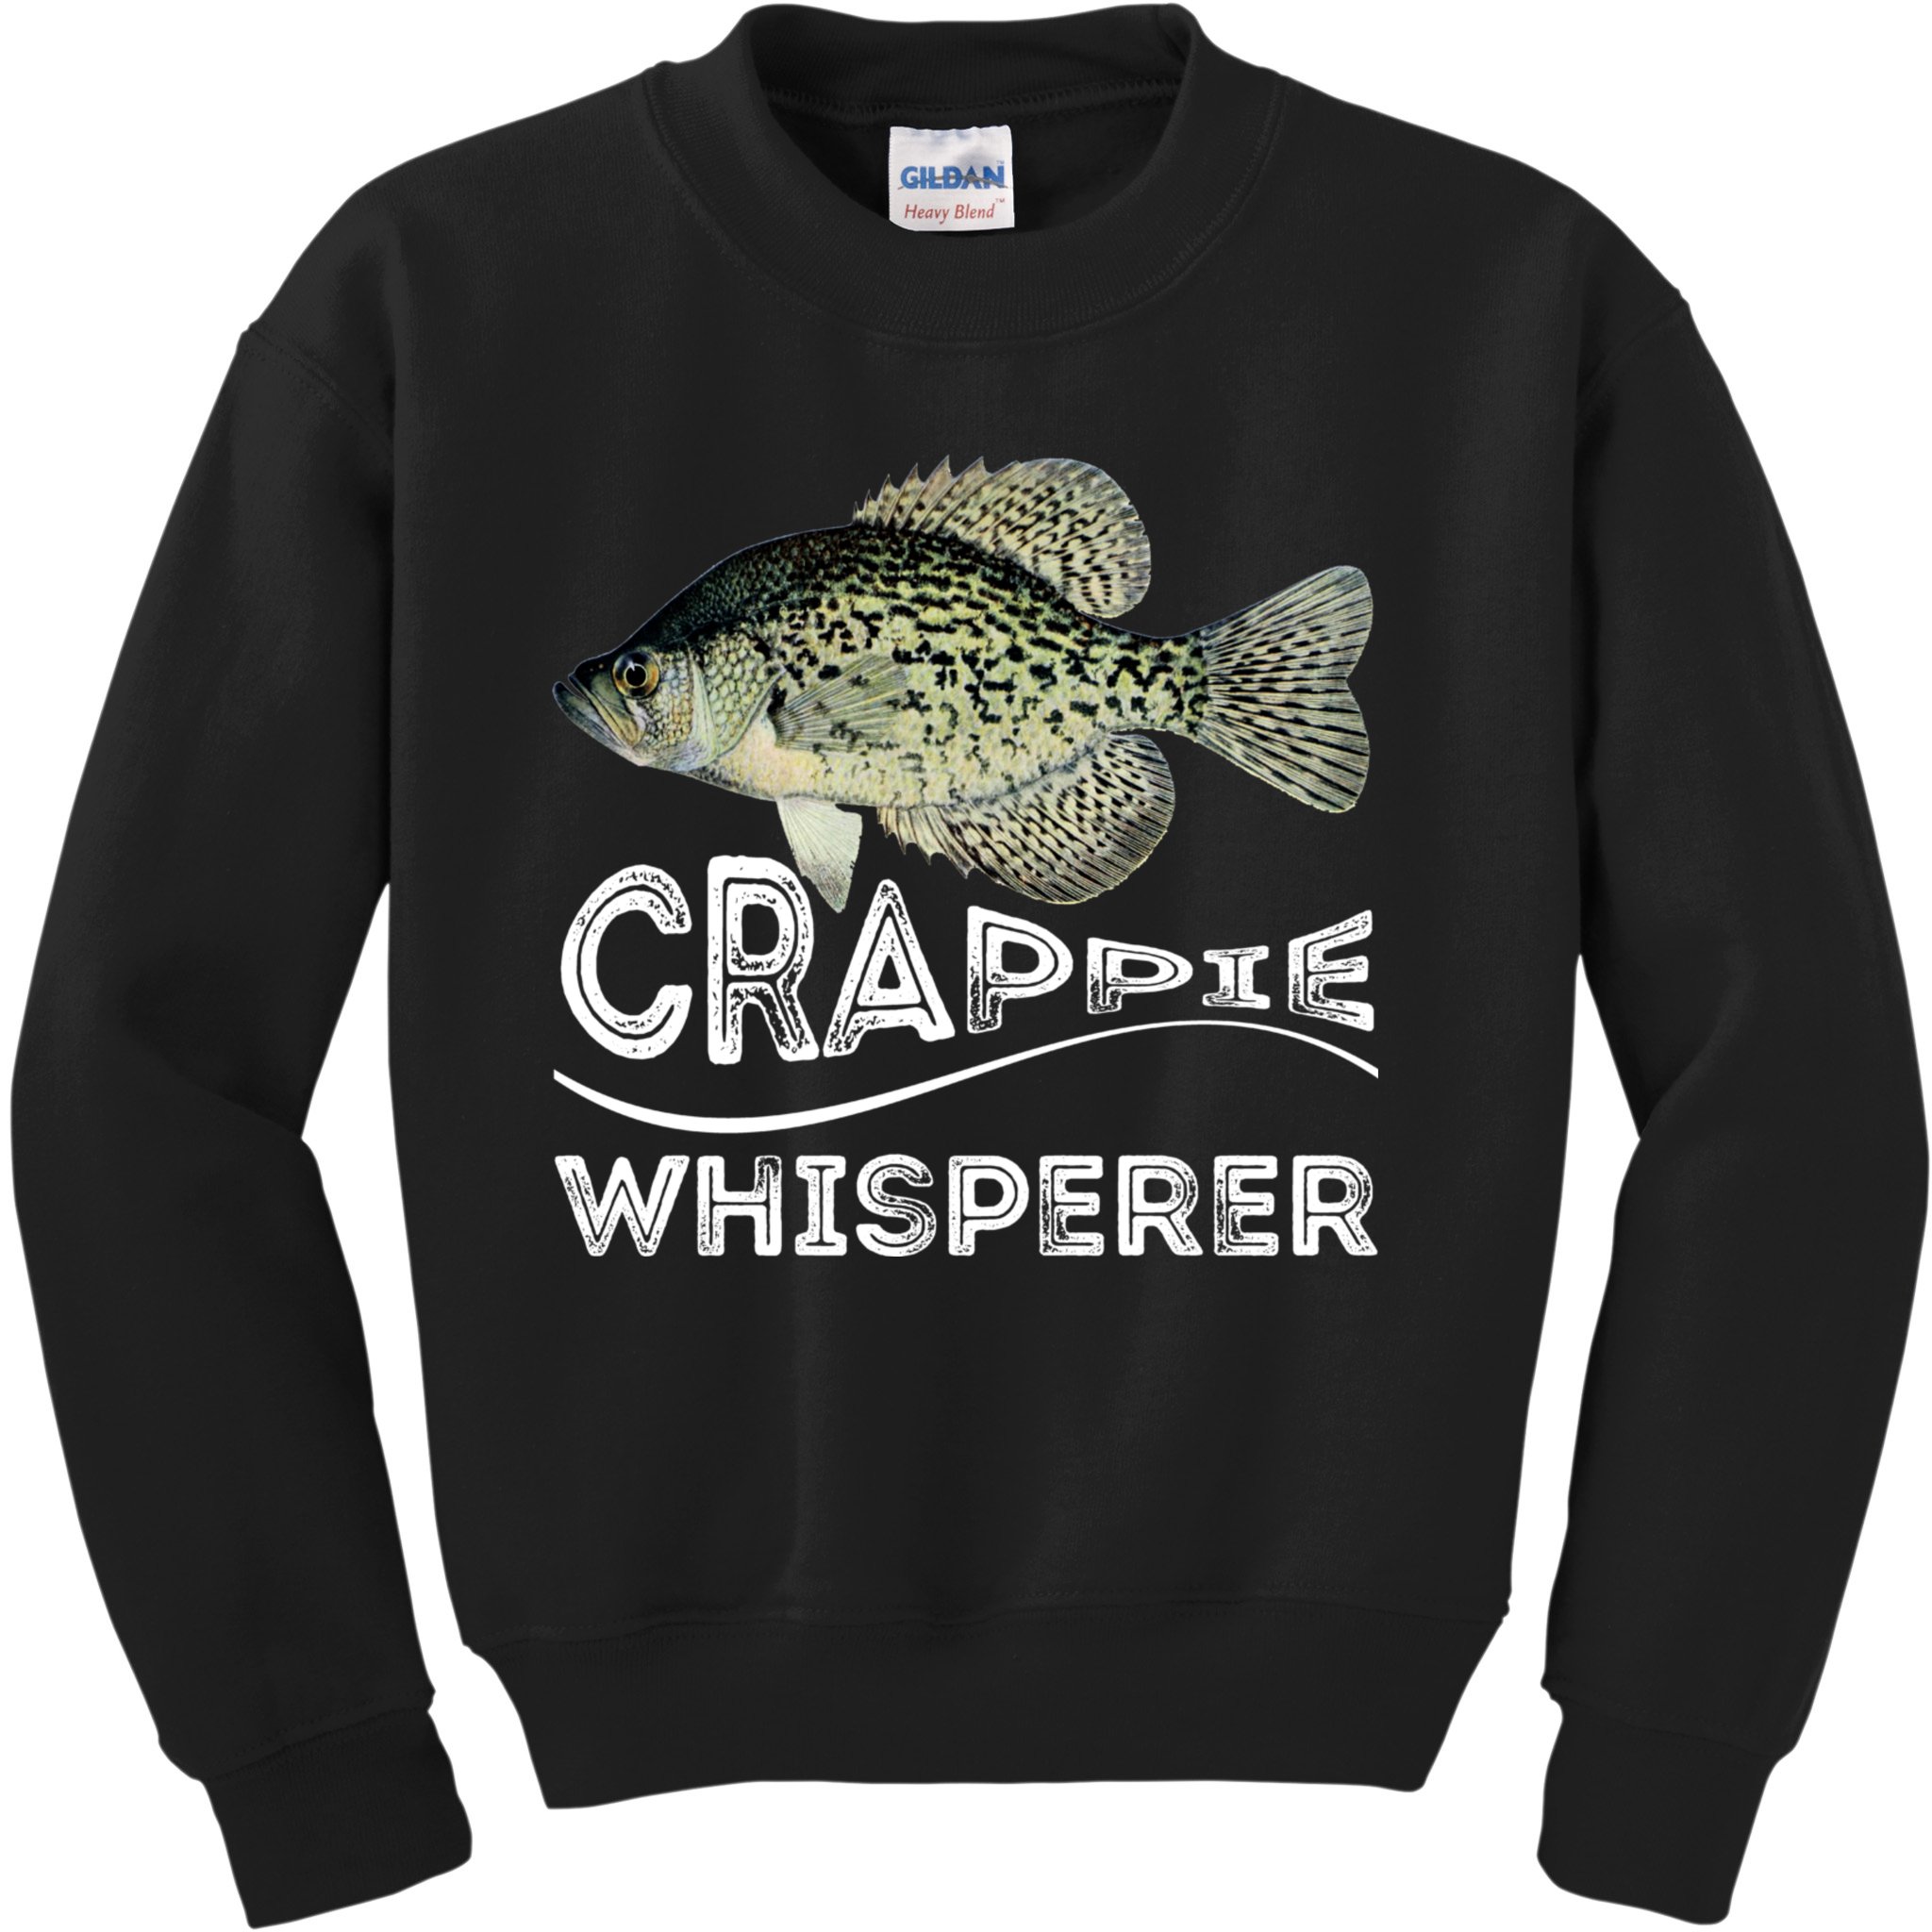 https://images3.teeshirtpalace.com/images/productImages/fcw0732879-funny-crappie-whisperer-fishing-black-crappie-lake-fish-gift--black-yas-garment.jpg